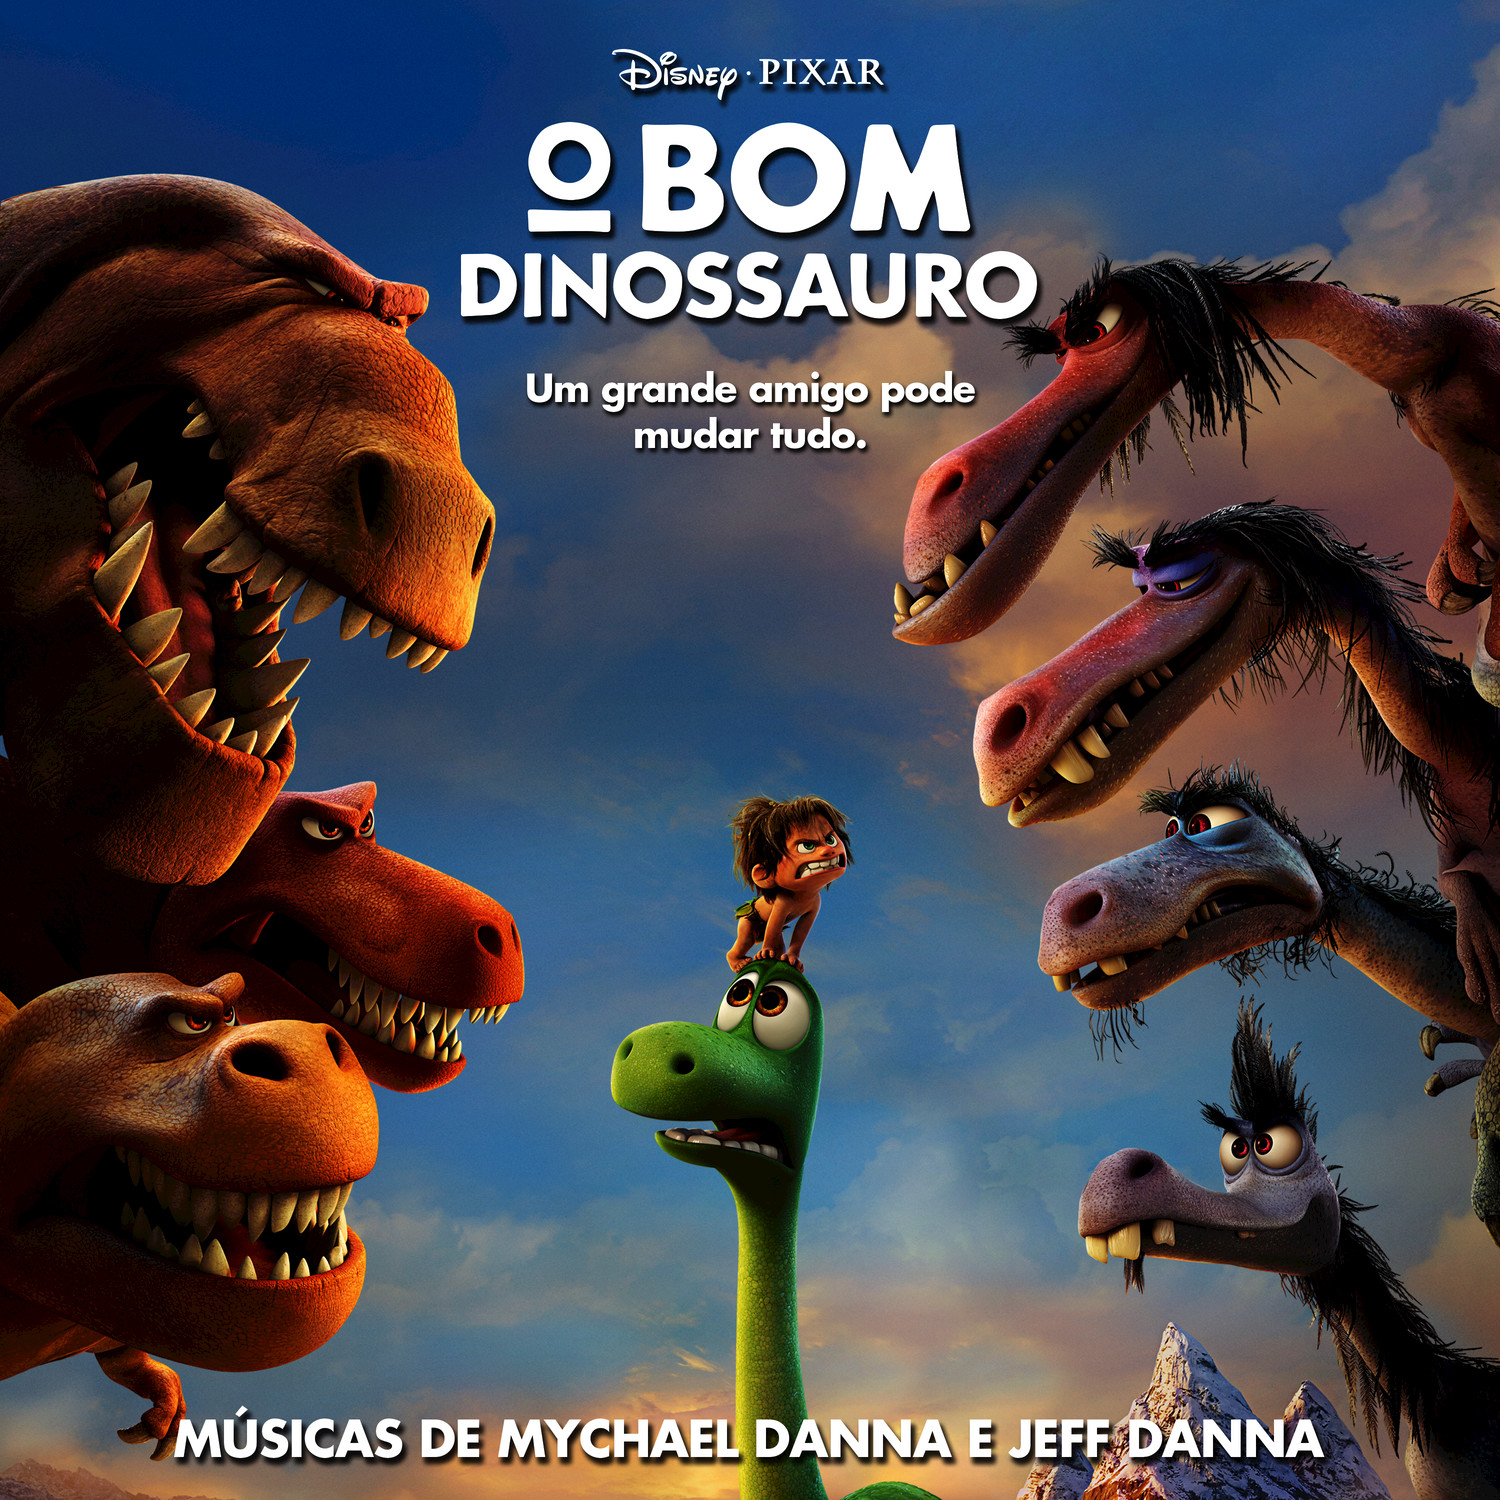 Run With the Herd (From "The Good Dinosaur" Score)